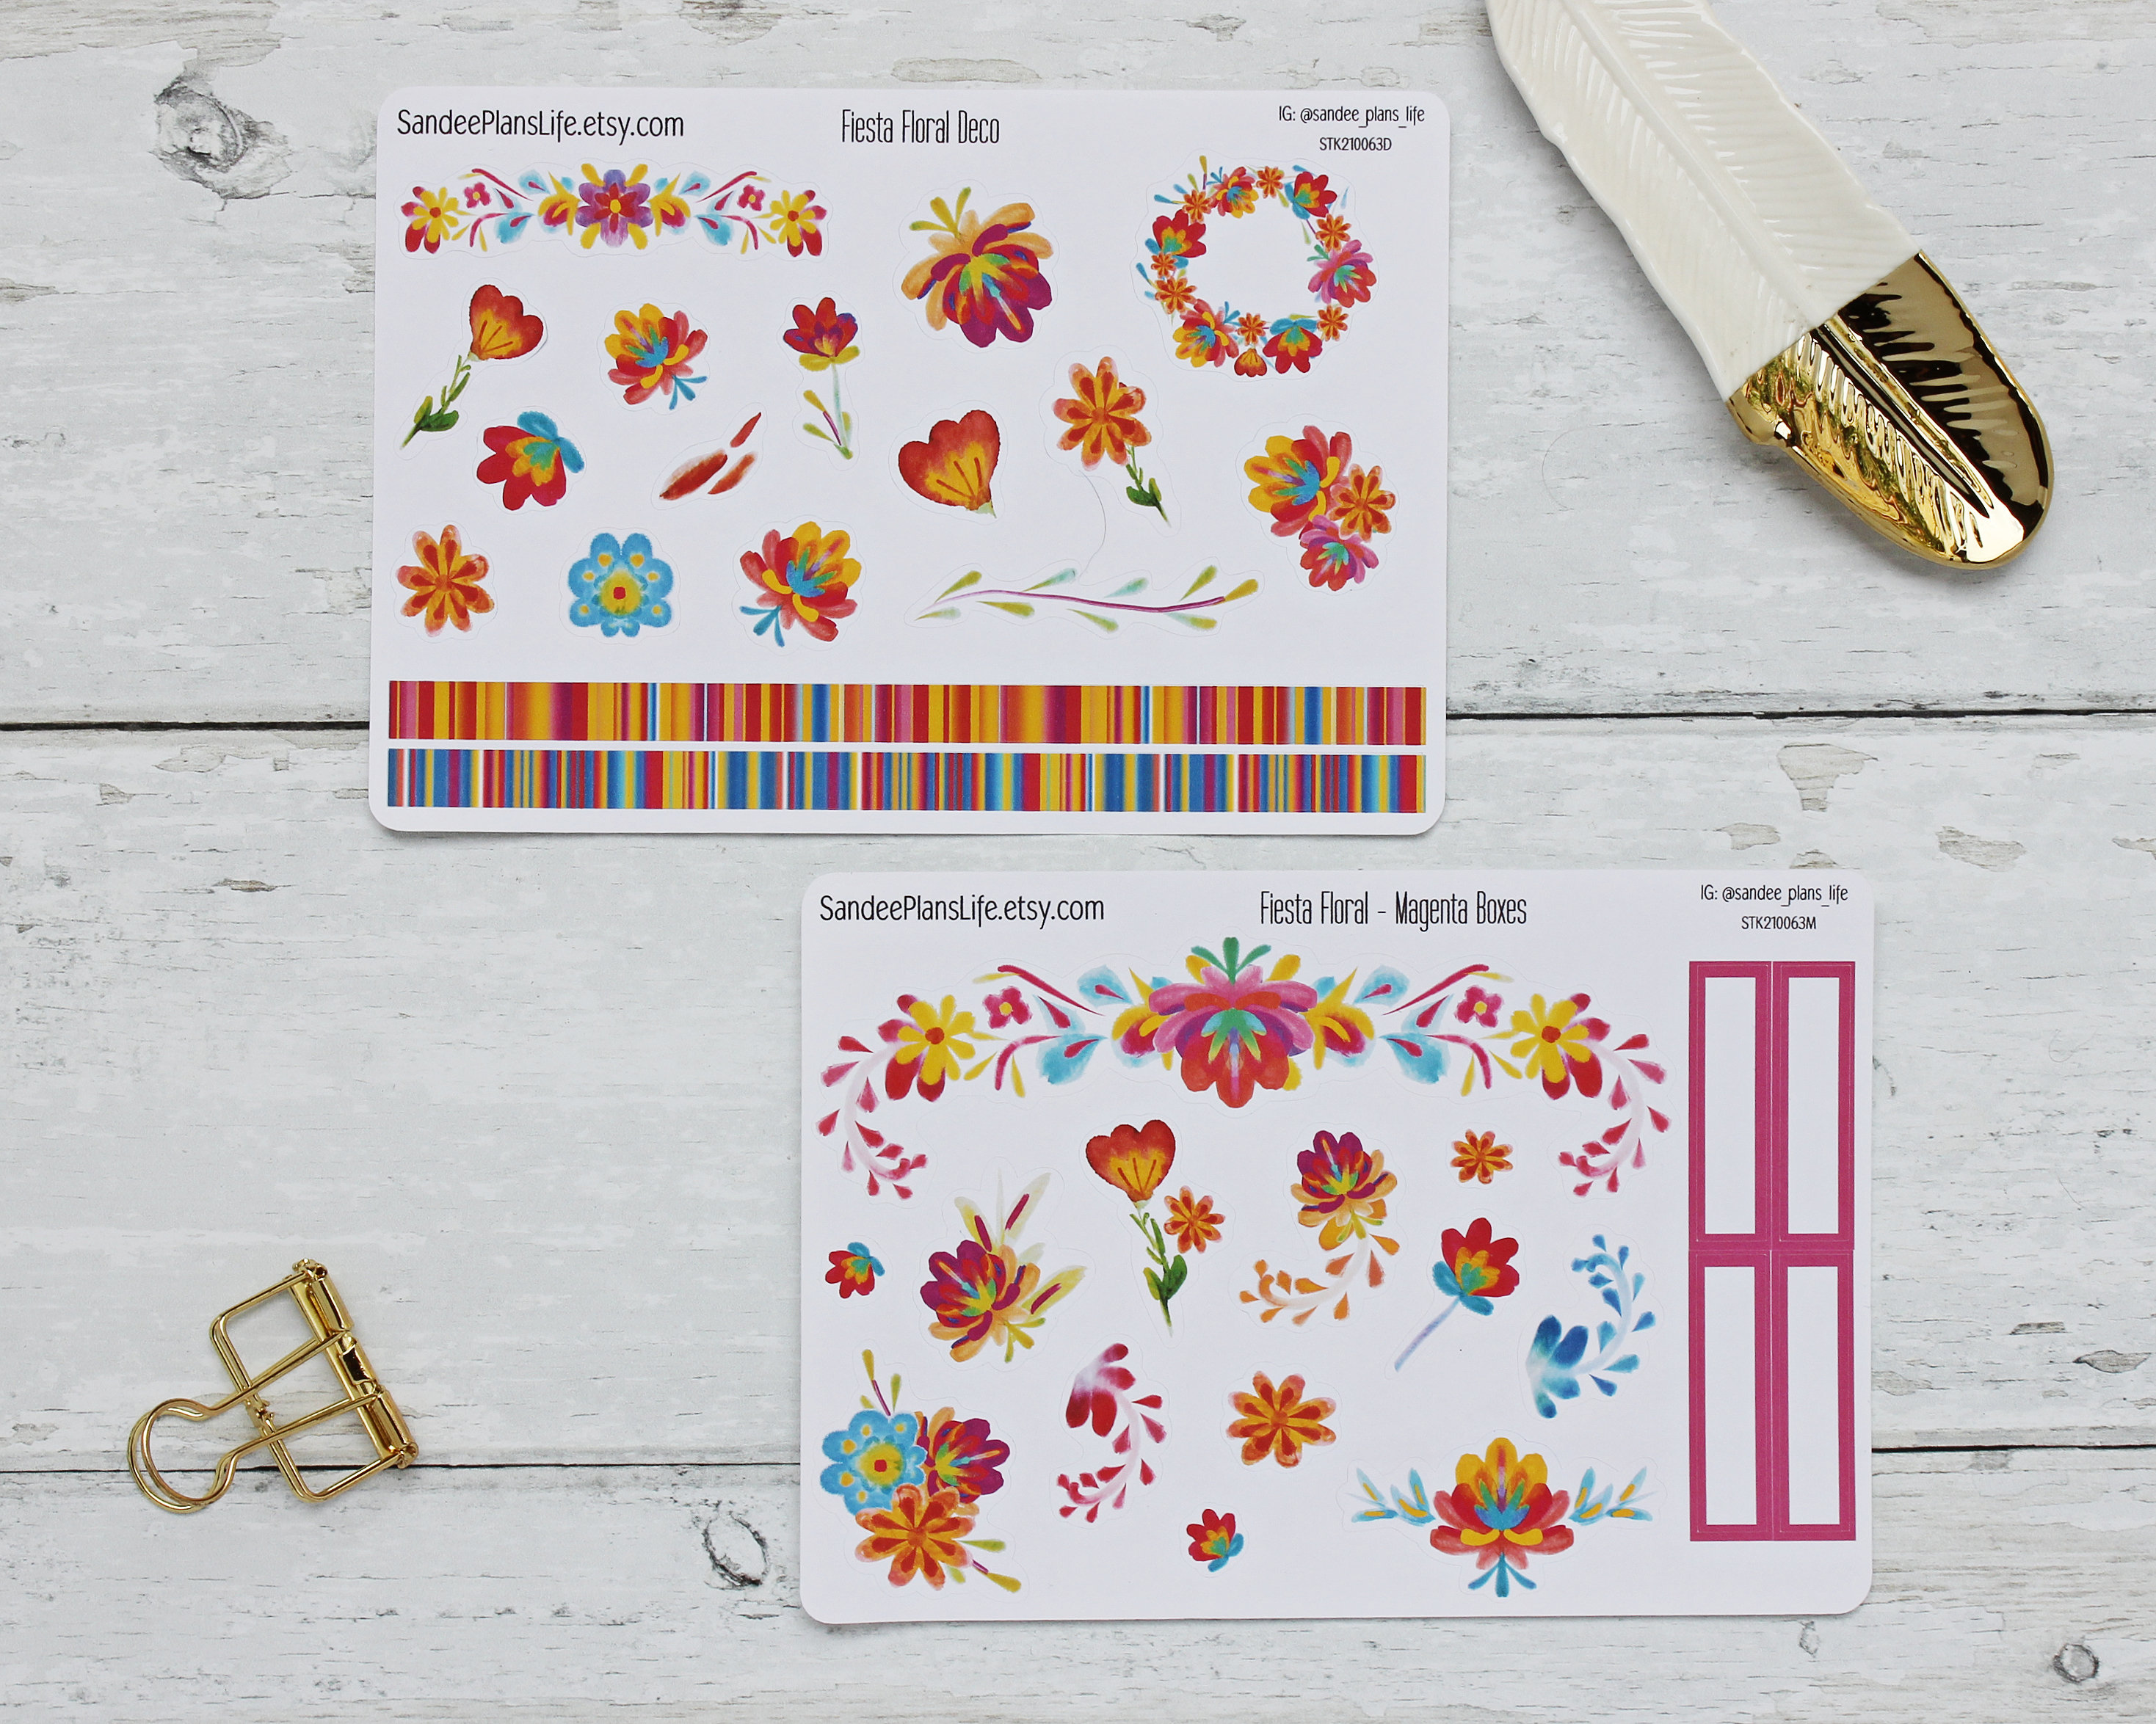 Mexico Fiesta Floral Watercolor Sticker Whimsical Bright Floral Stickers Washi Strips Colorful mall FunctionLabel Boxes